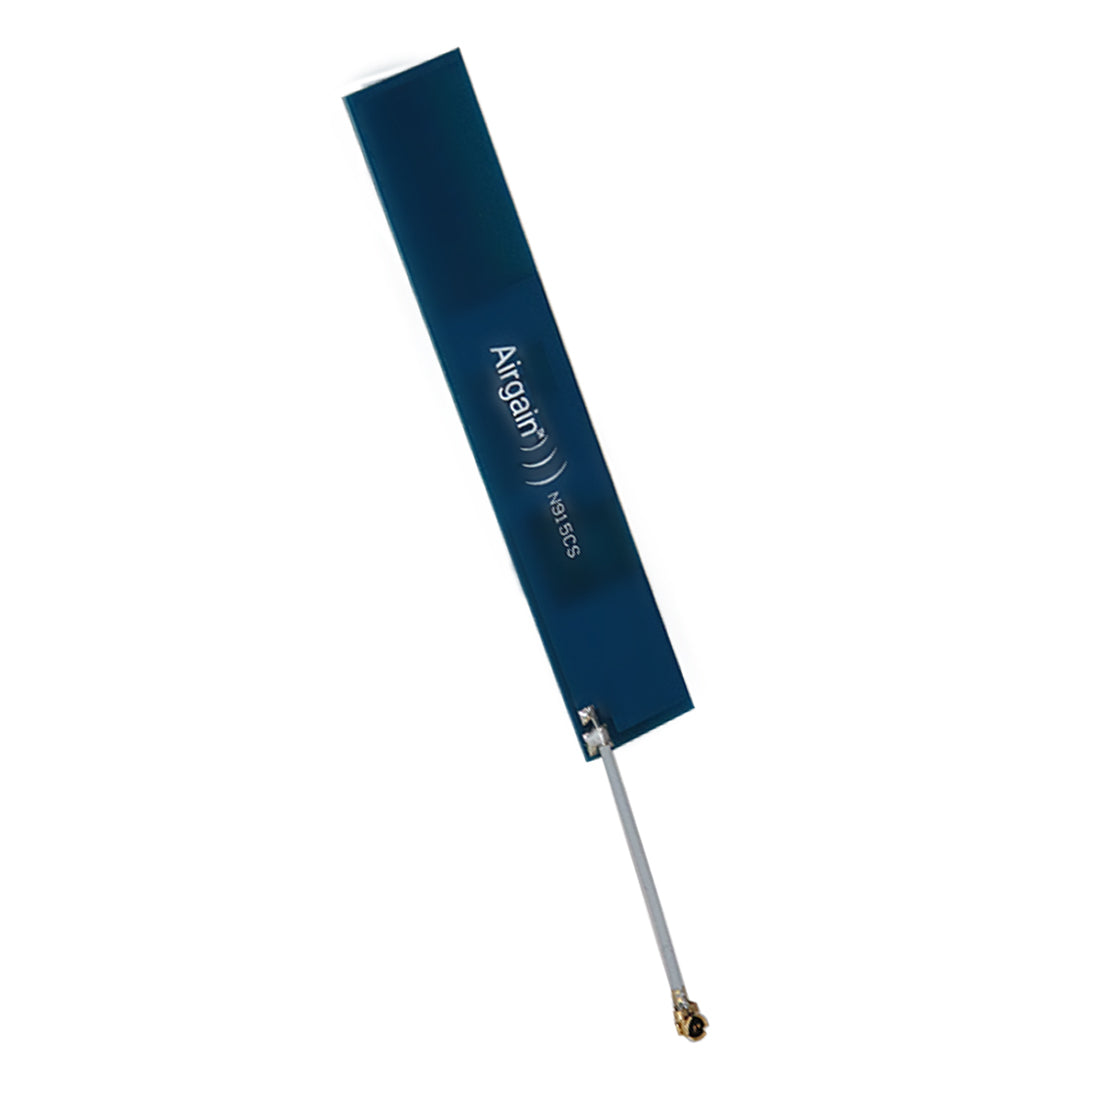 N915CSTG100U: Single Band (824-960 MHz) Embedded Antenna for GSM with 100 mm long Cable